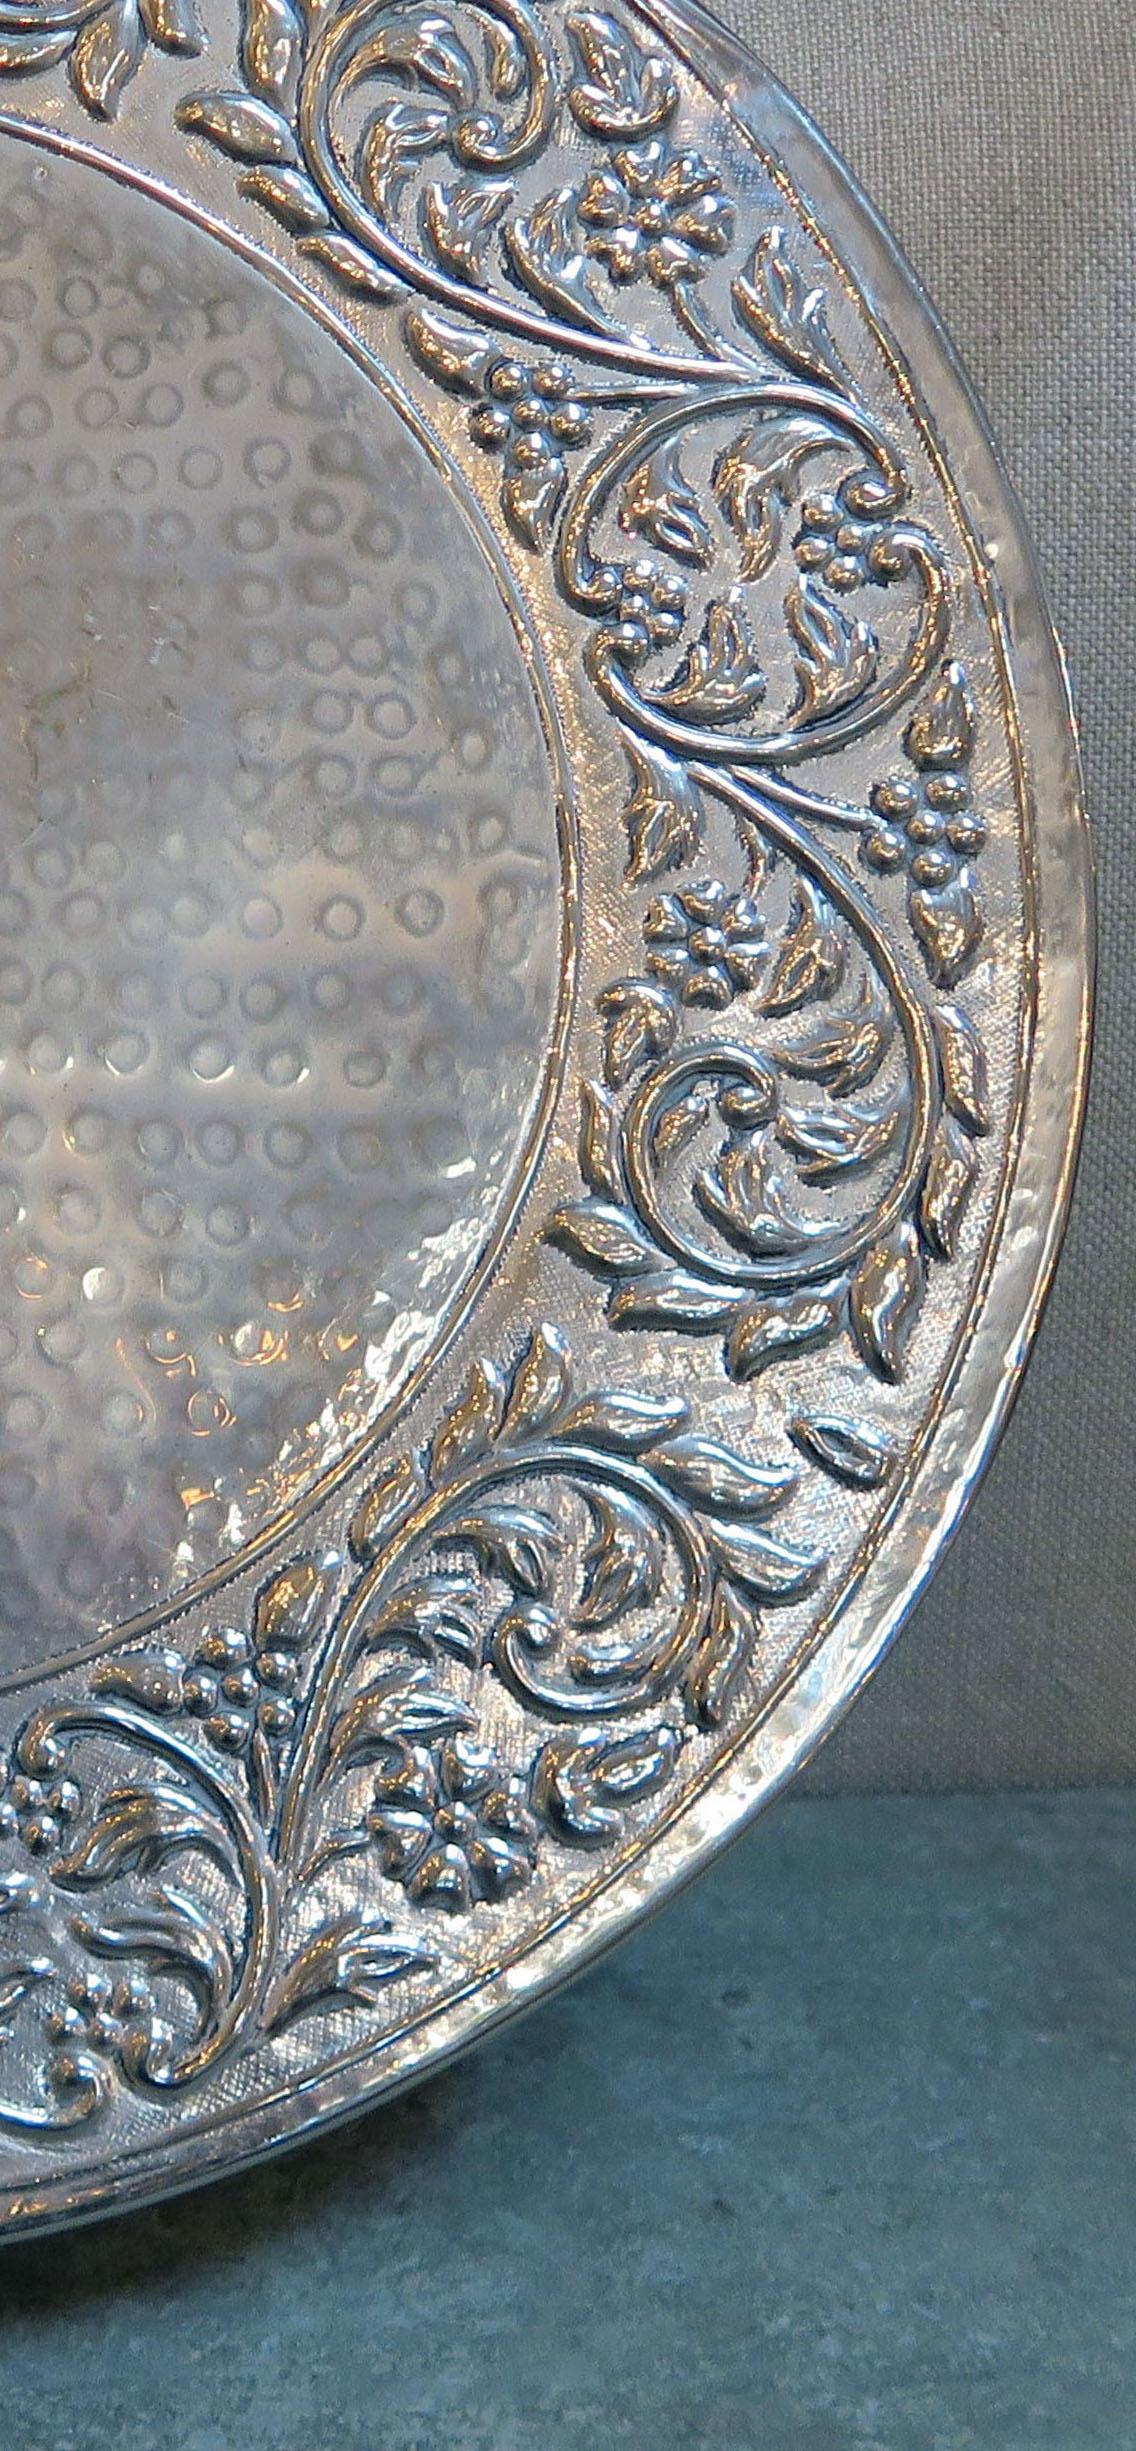 Silver Plated Repoussé Cake Stand C. 1900  1